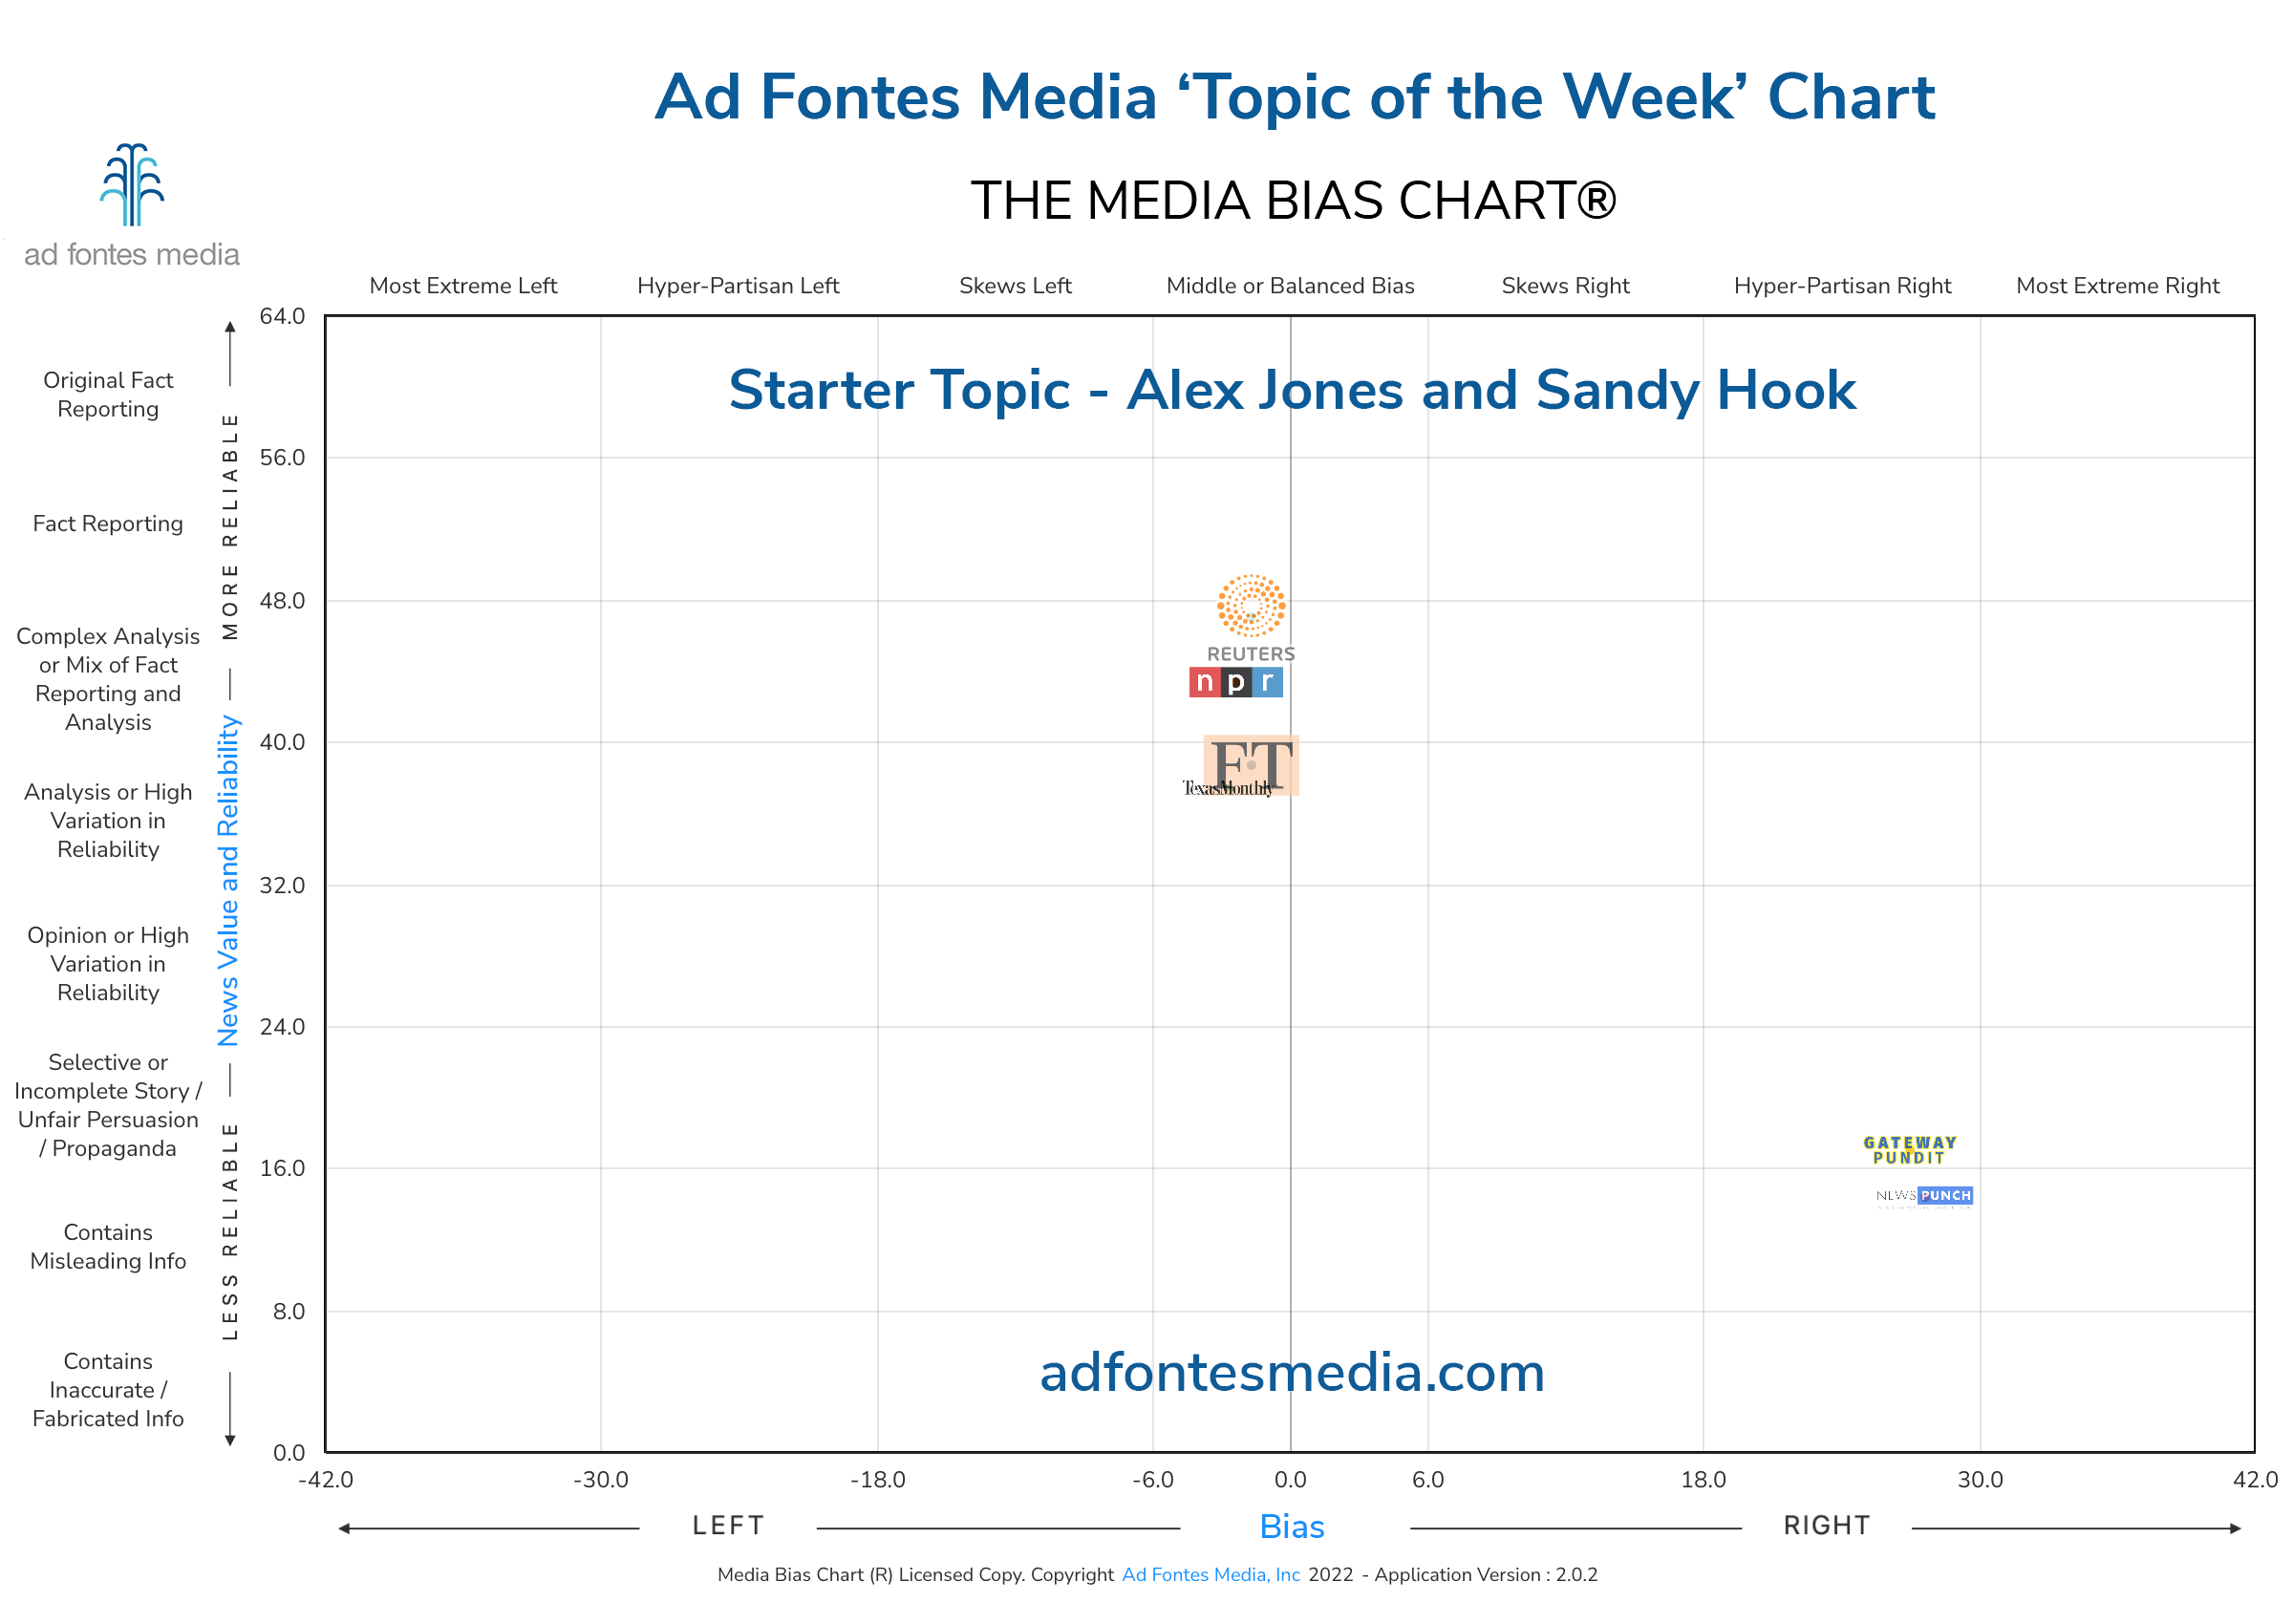 Scores for the Alex Jones and Sandy Hook articles on the chart